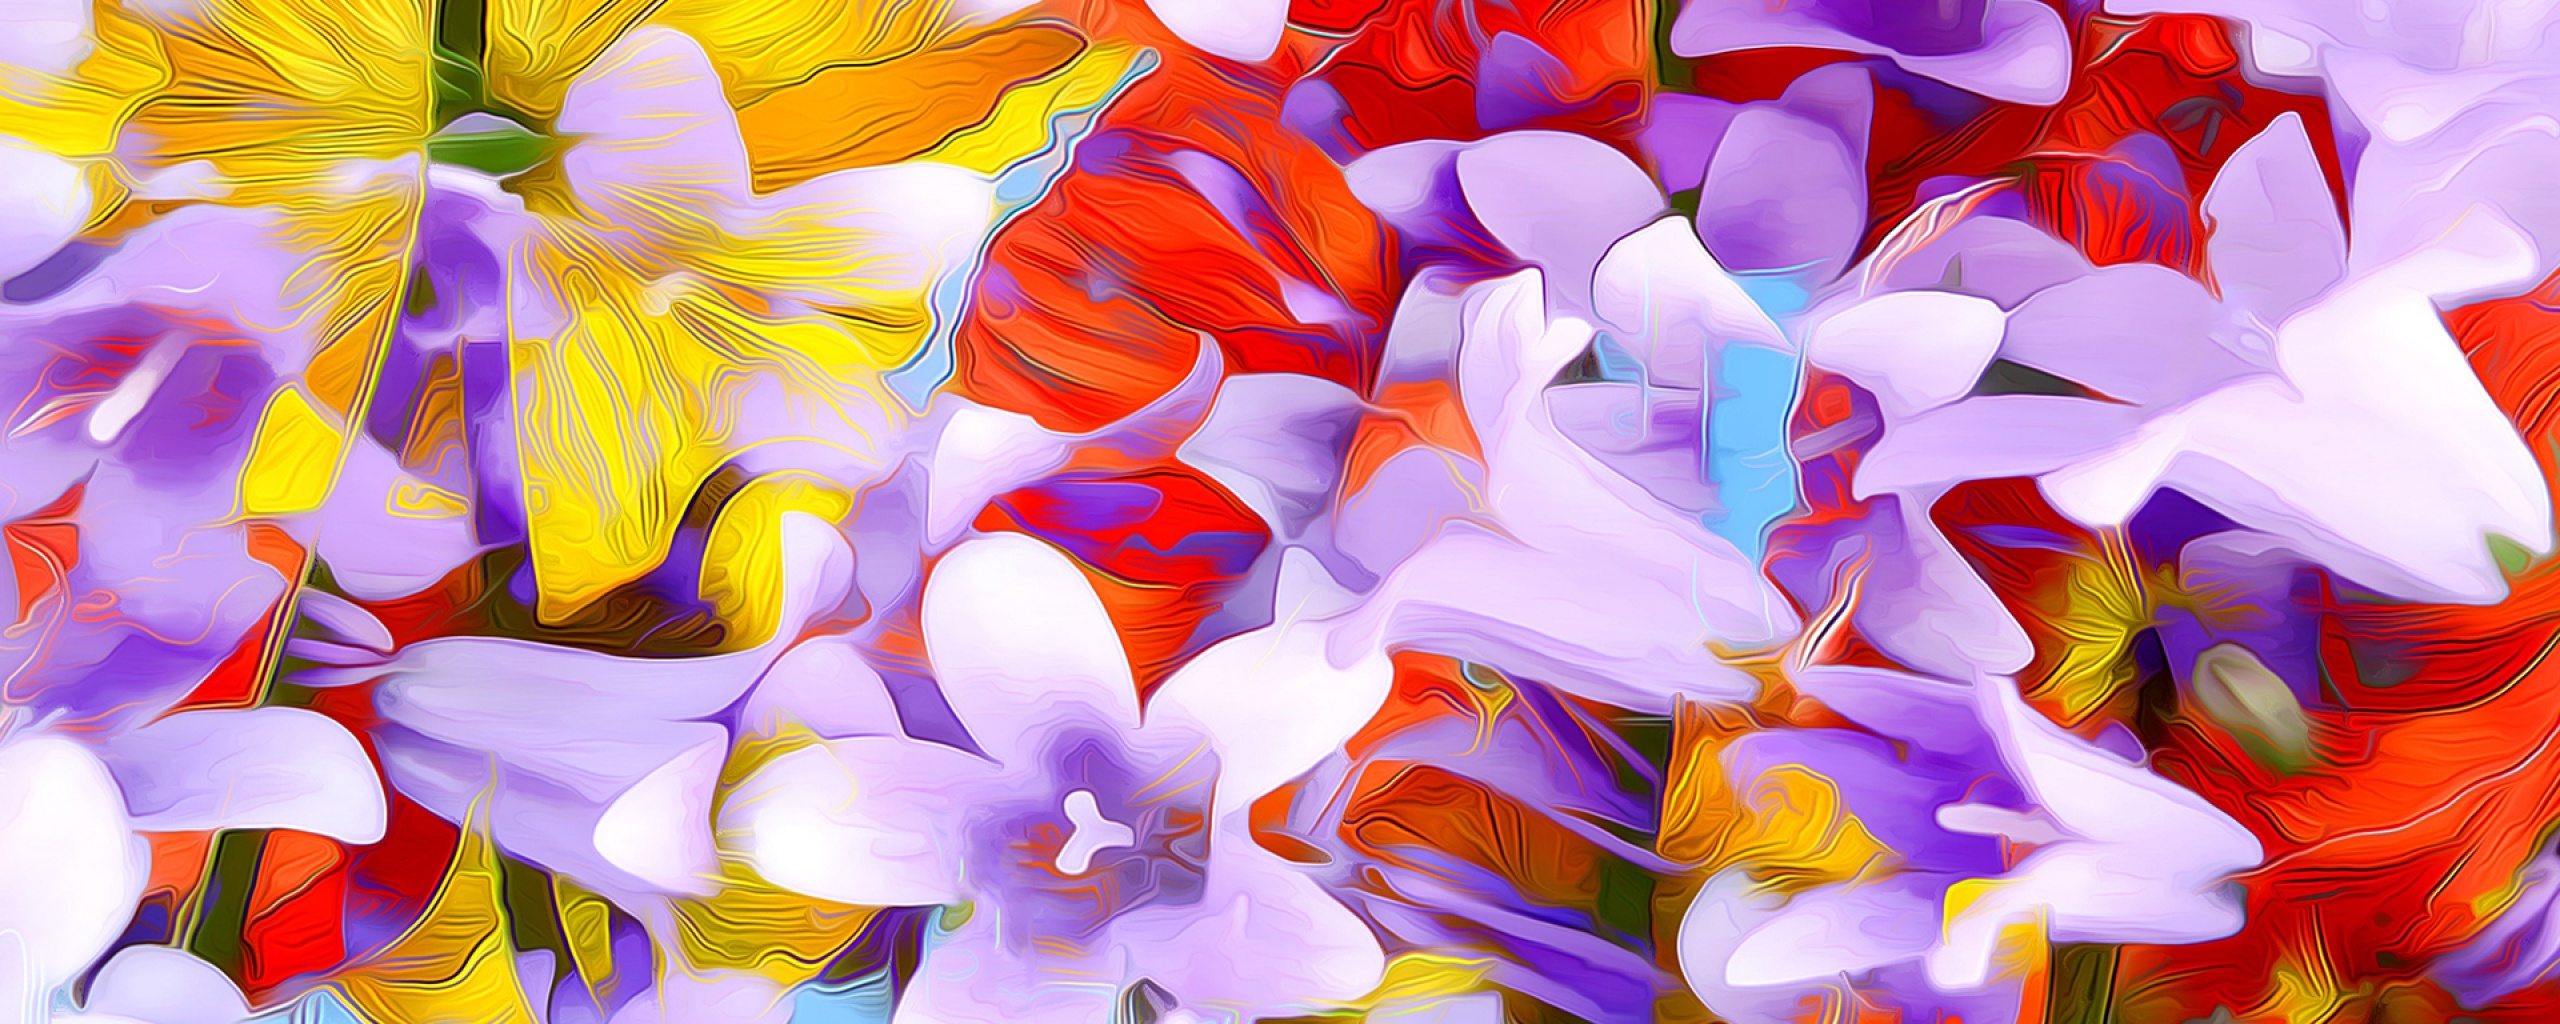 Flowers Art Abstraction (click to view) HD Wallpapers in 2560x1024 Resolution